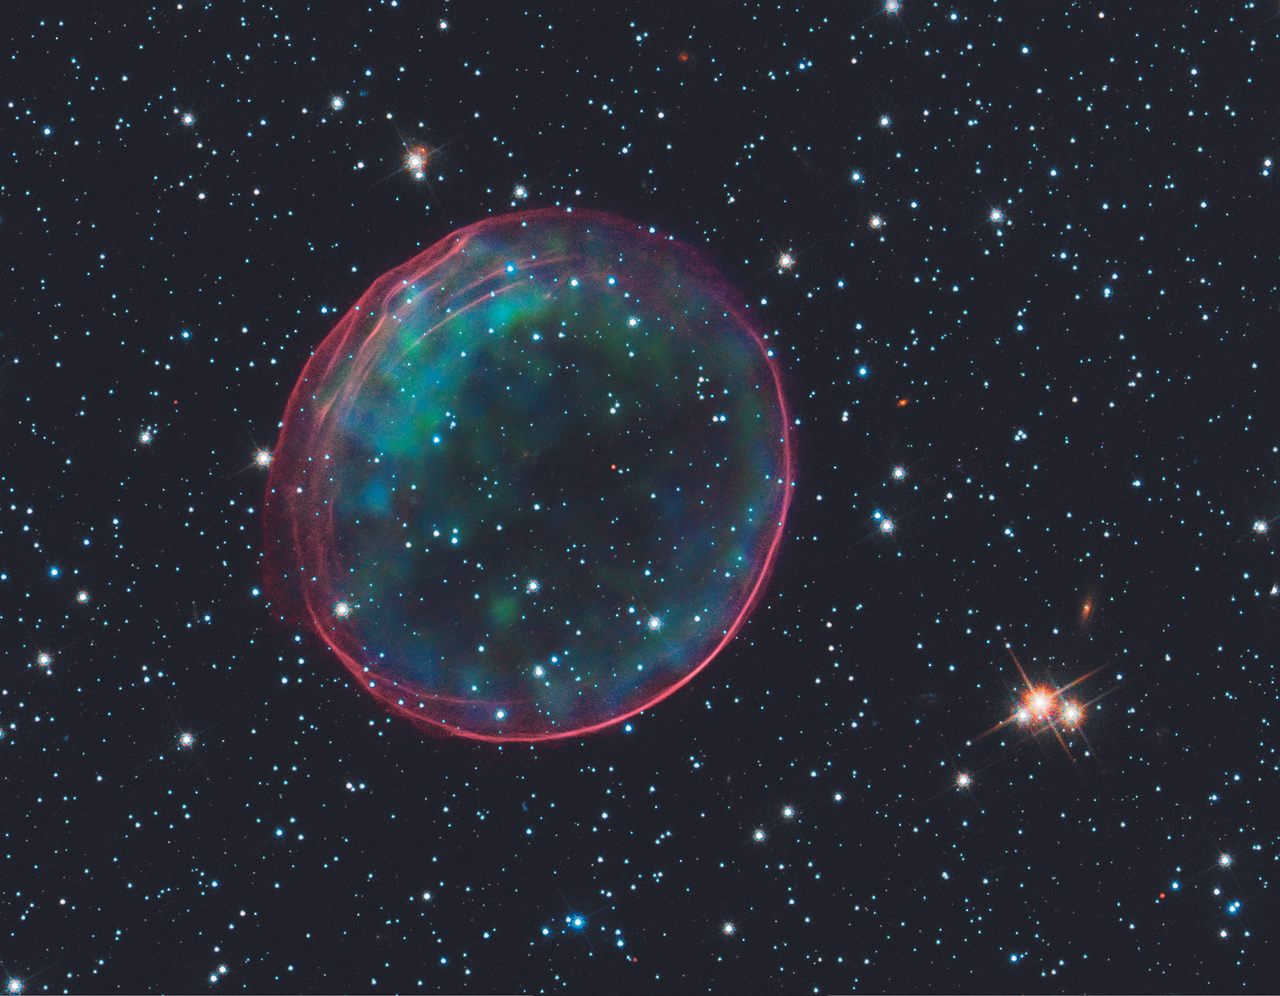 The remnant of a supernova that occurred 160,000 light years from Earth. The stellar explosion would have been visible in the Southern Hemisphere around 1600.